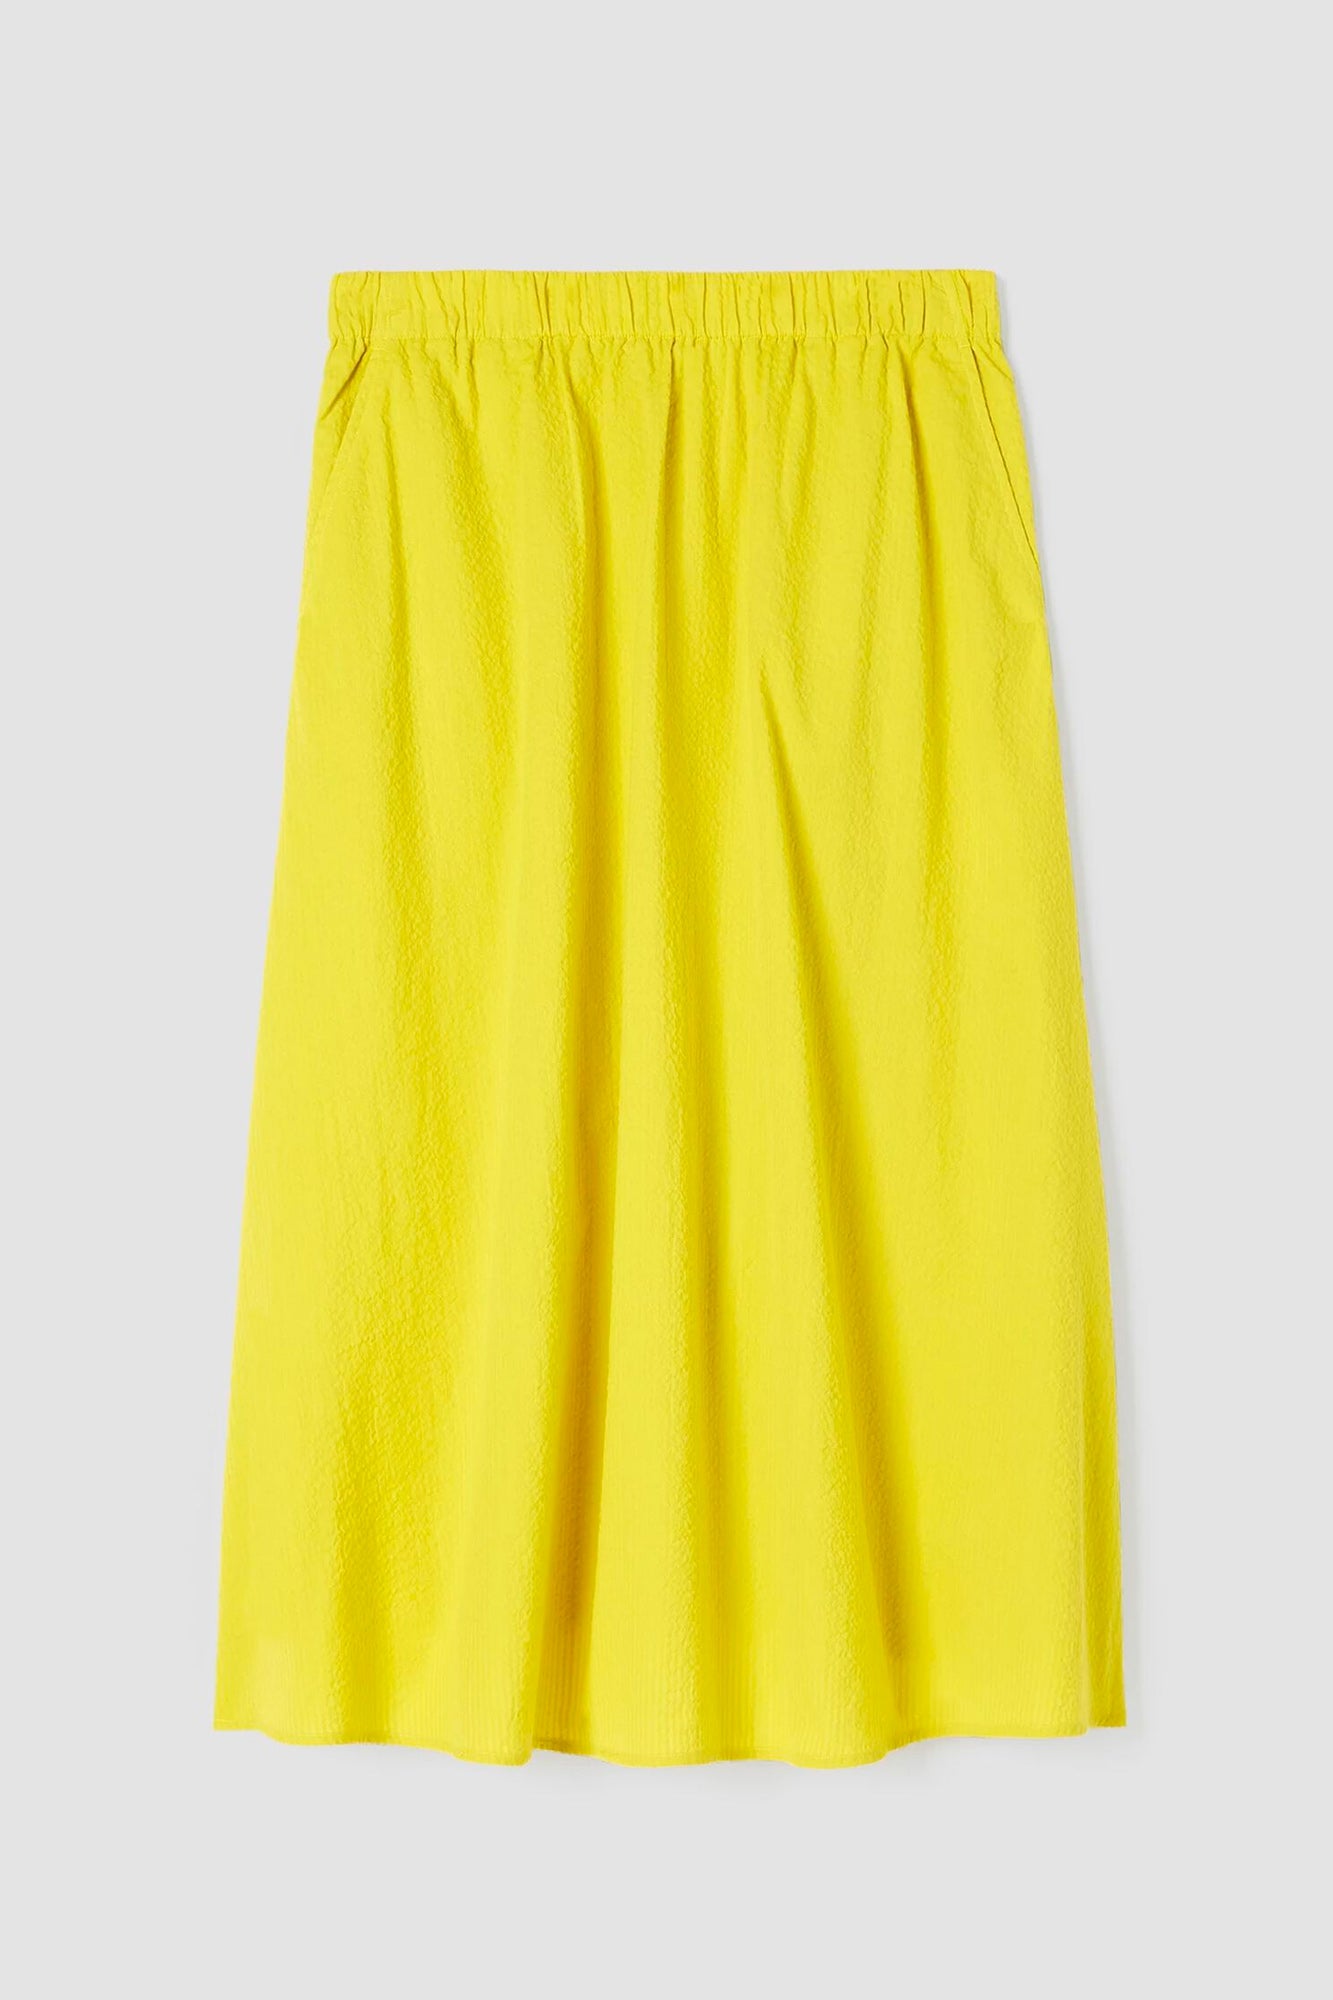 This Full Length Gathered Skirt from Eileen Fisher is designed for modern comfort and classic style.